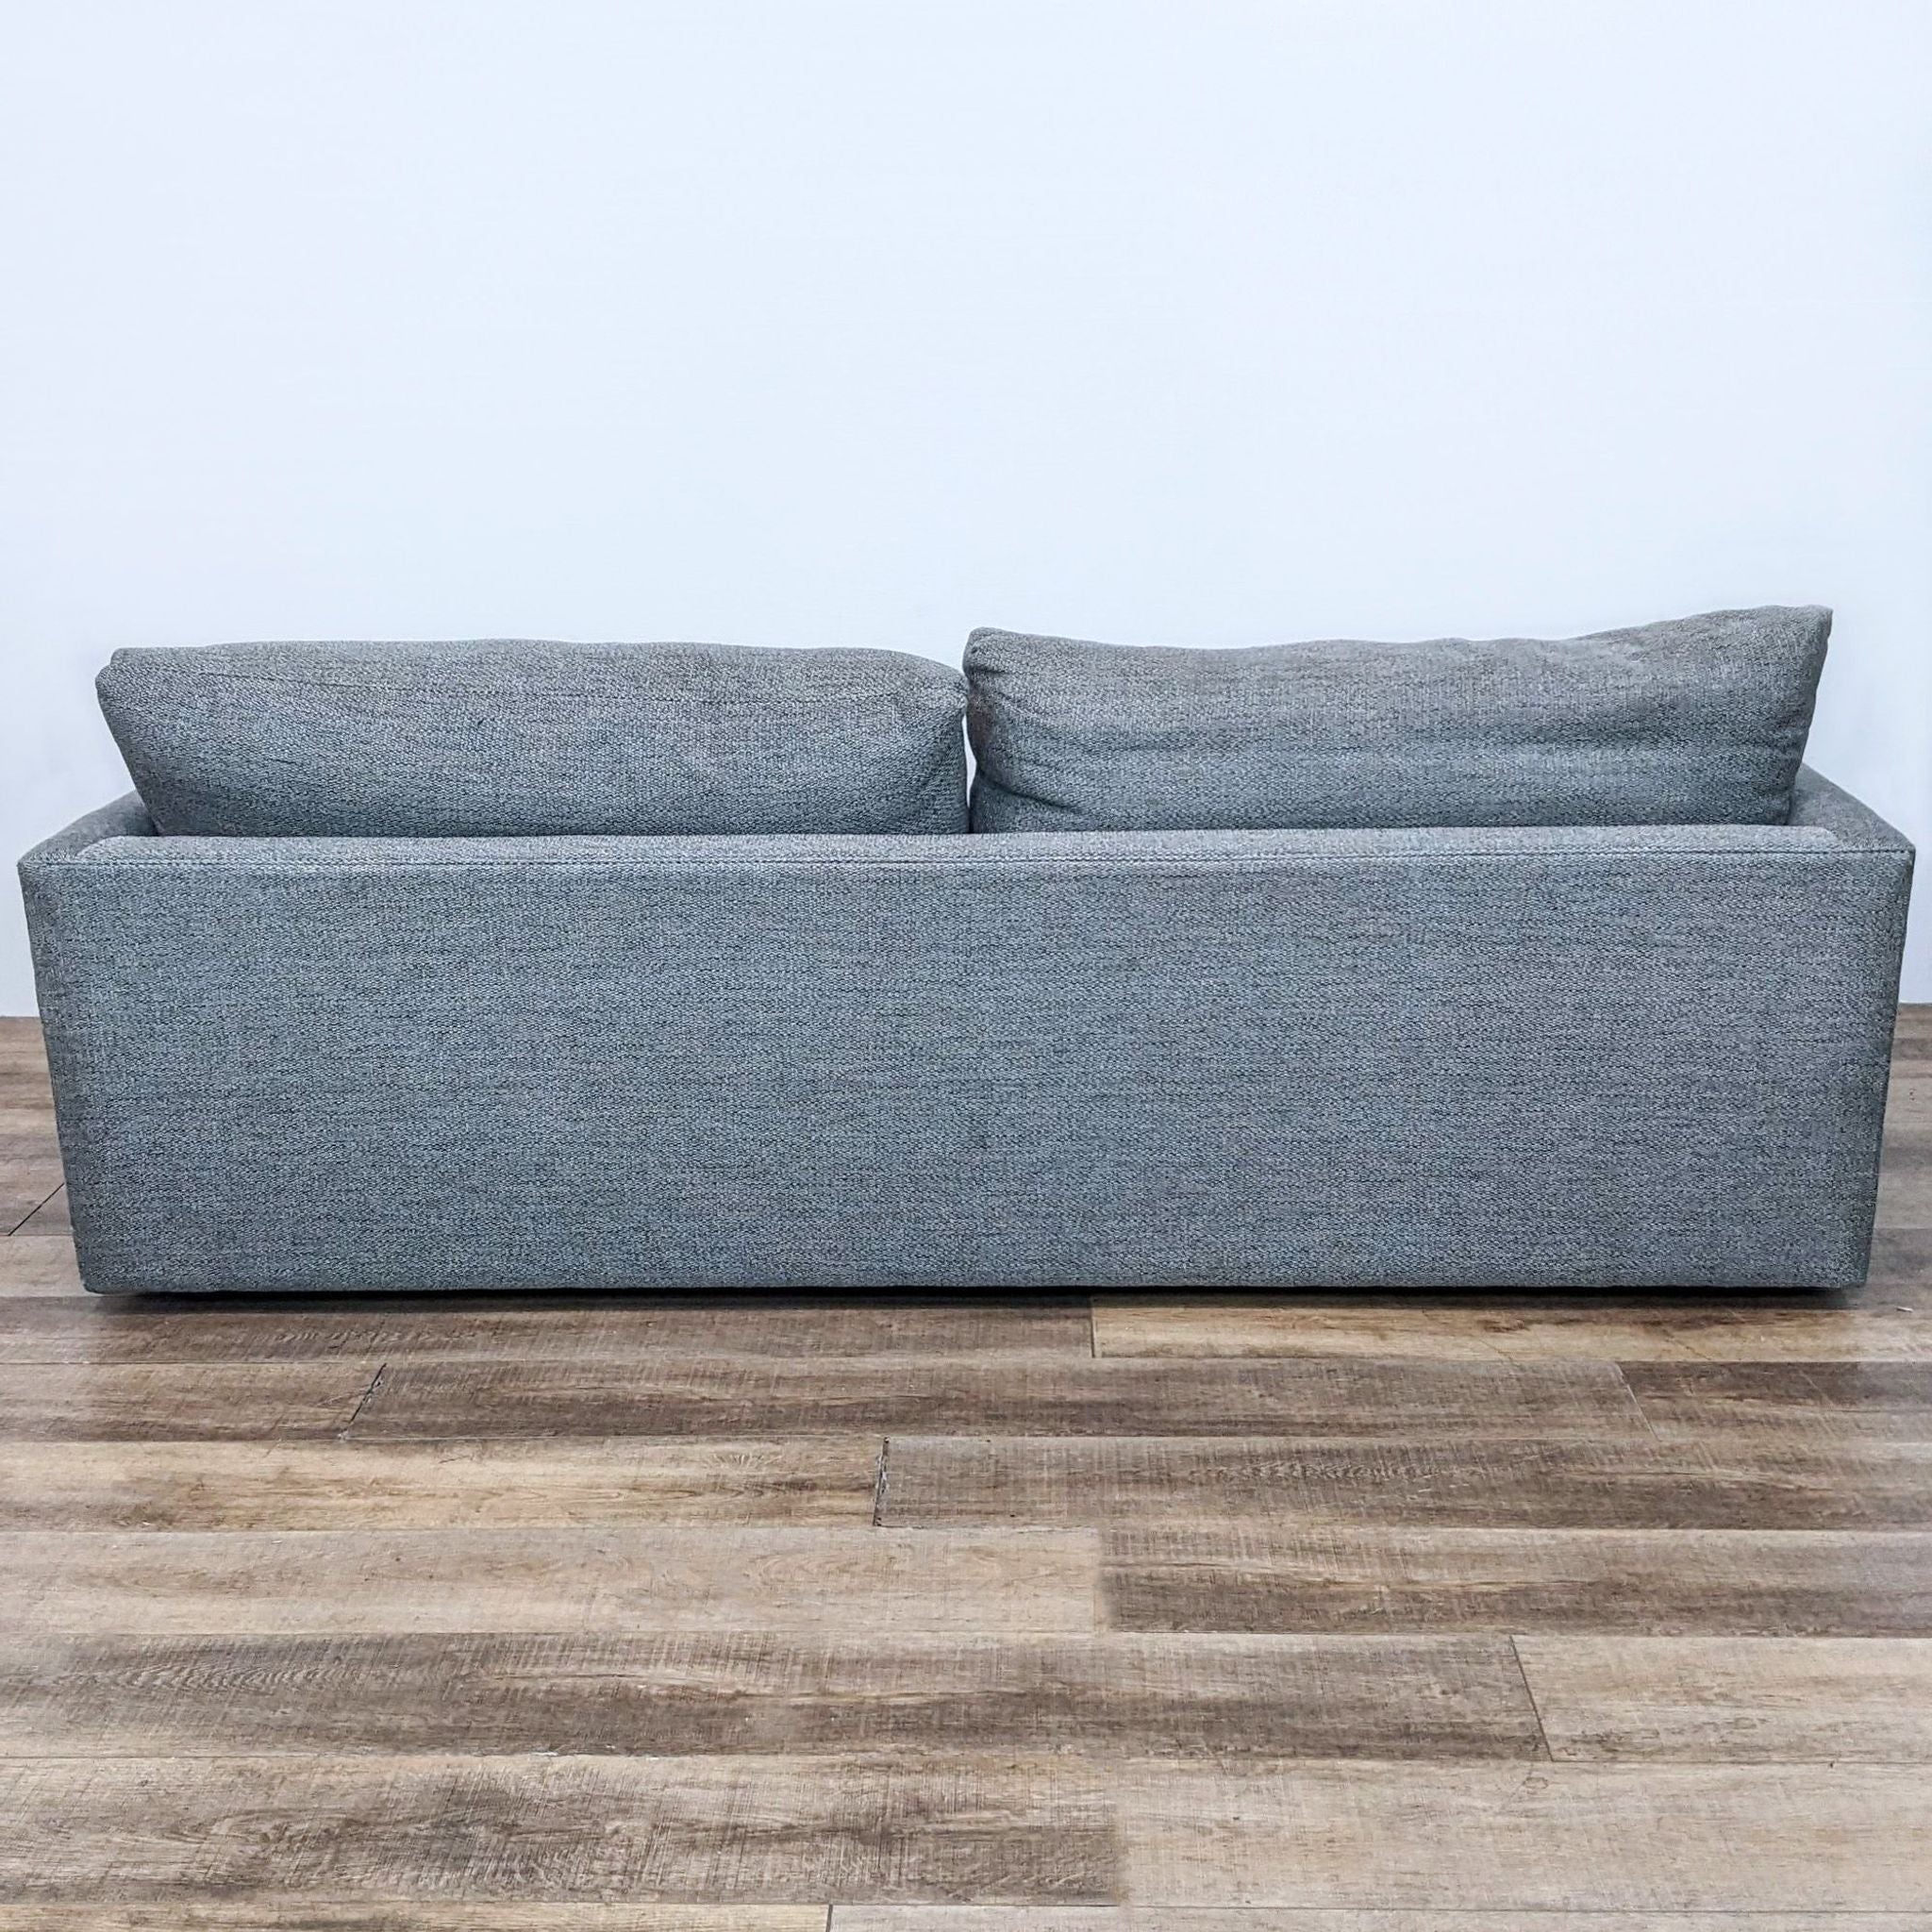 Crate & Barrel exclusive 3-seat modern sofa with deep seats, slim track arms, and soft back cushions.